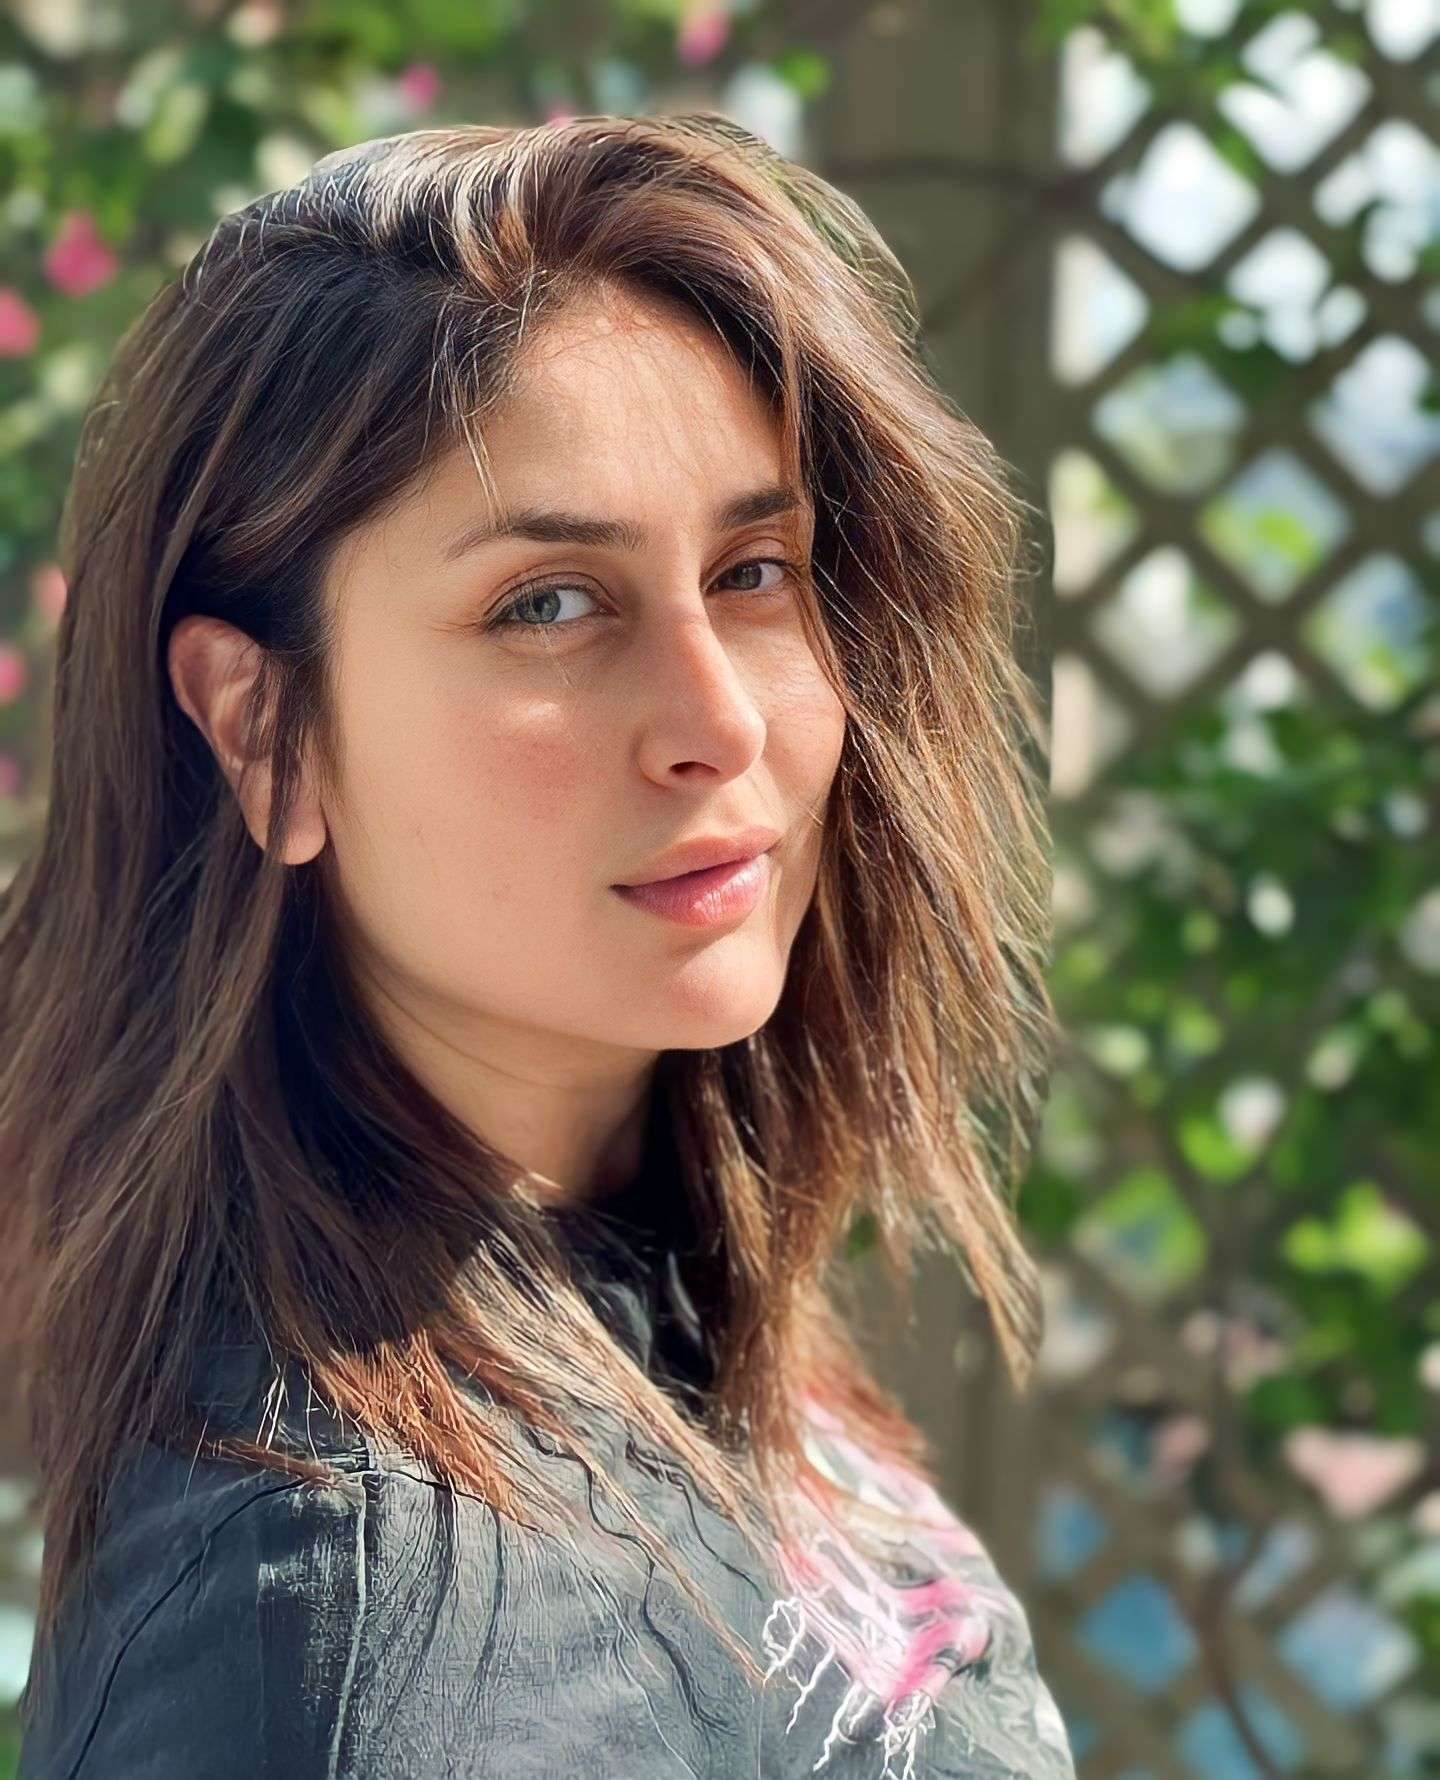 Meena Sex Video Blue Film Tamil - Kareena Kapoor: 'Porn, Sex, Nude, Xnxx, Fuck, Xxx' | Blue Film, Kiss,  Without Makeup, Boobs | Hot, Sexy, Fucking: 'Videos, Photos, Pics, Images'  | Biography, Boyfriend, Age, Height, Net Worth - Know Your Celebs